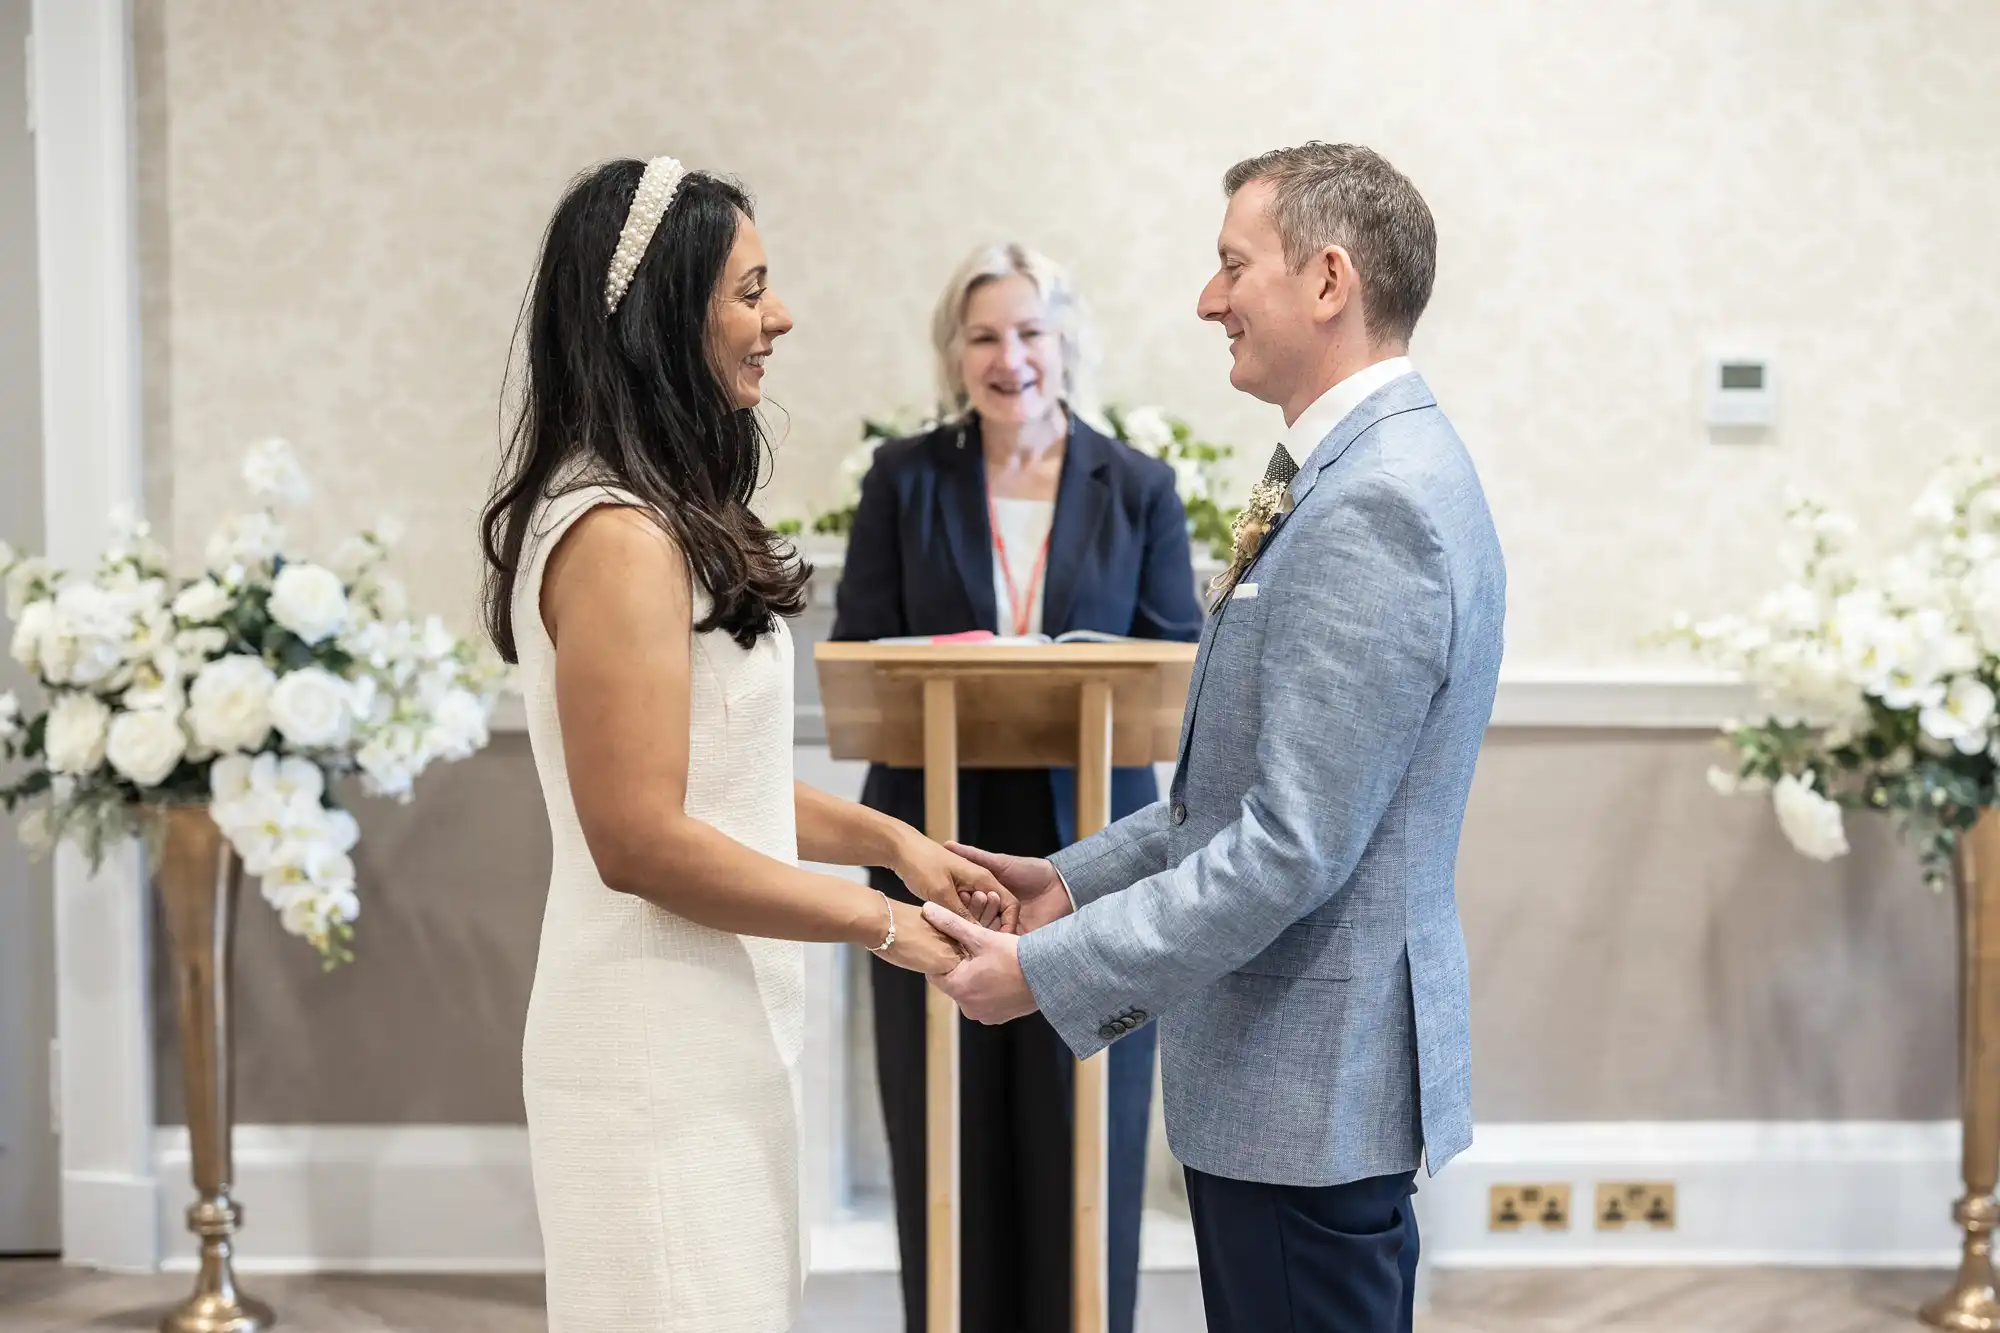 A couple is exchanging vows at their wedding ceremony, standing in front of an officiant. Both are smiling and holding hands. White floral arrangements are displayed on either side of them.